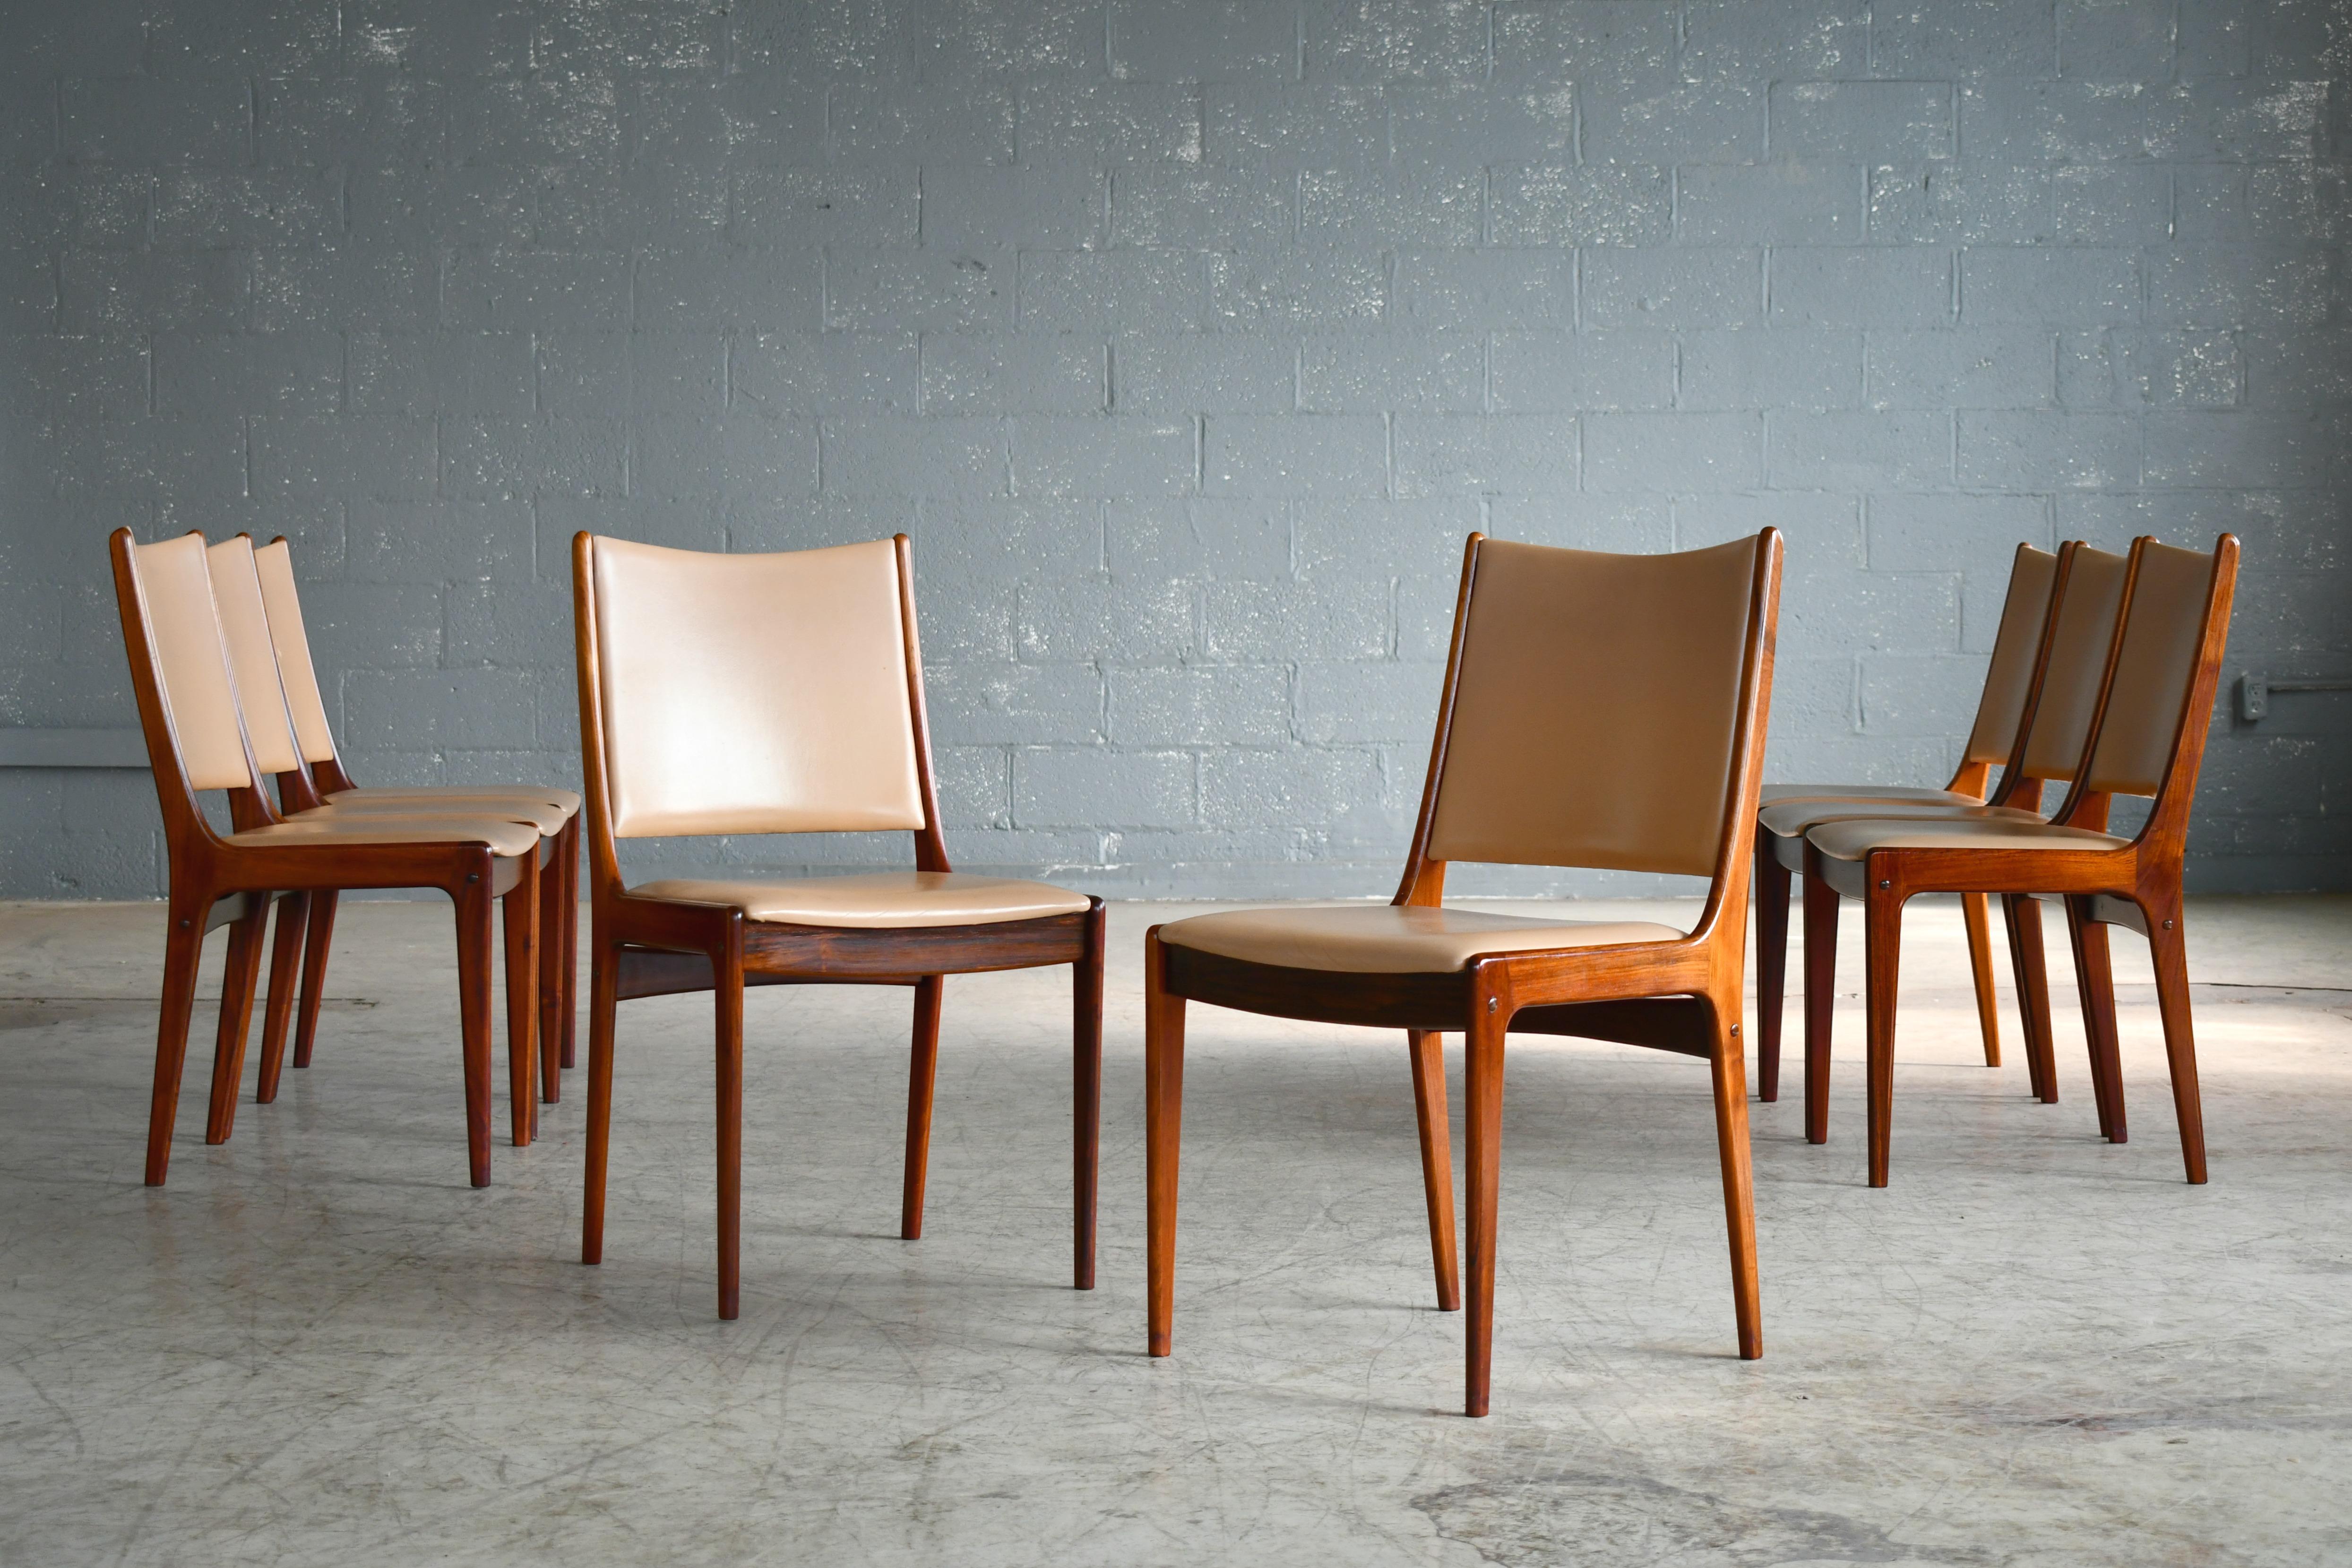 Beautiful set of 8 dining chairs in solid rosewood with leather covered seat and backrest designed by Johs Andersen for Uldum in the late 1960s. Classic light elegant Danish design. Overall very good to near excellent condition with the wood showing